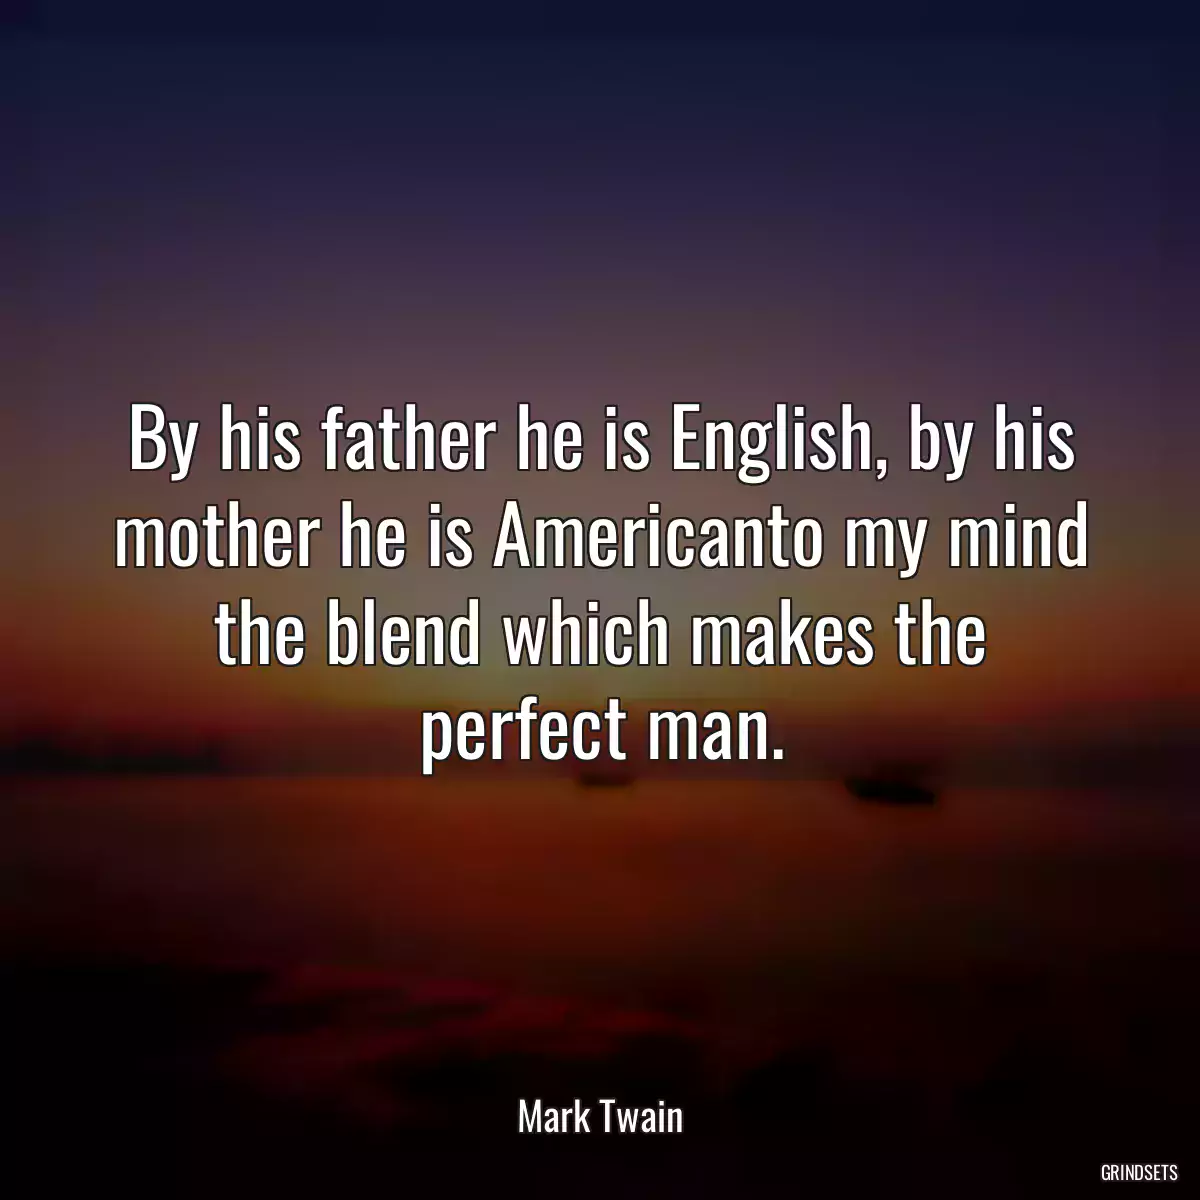 By his father he is English, by his mother he is Americanto my mind the blend which makes the perfect man.